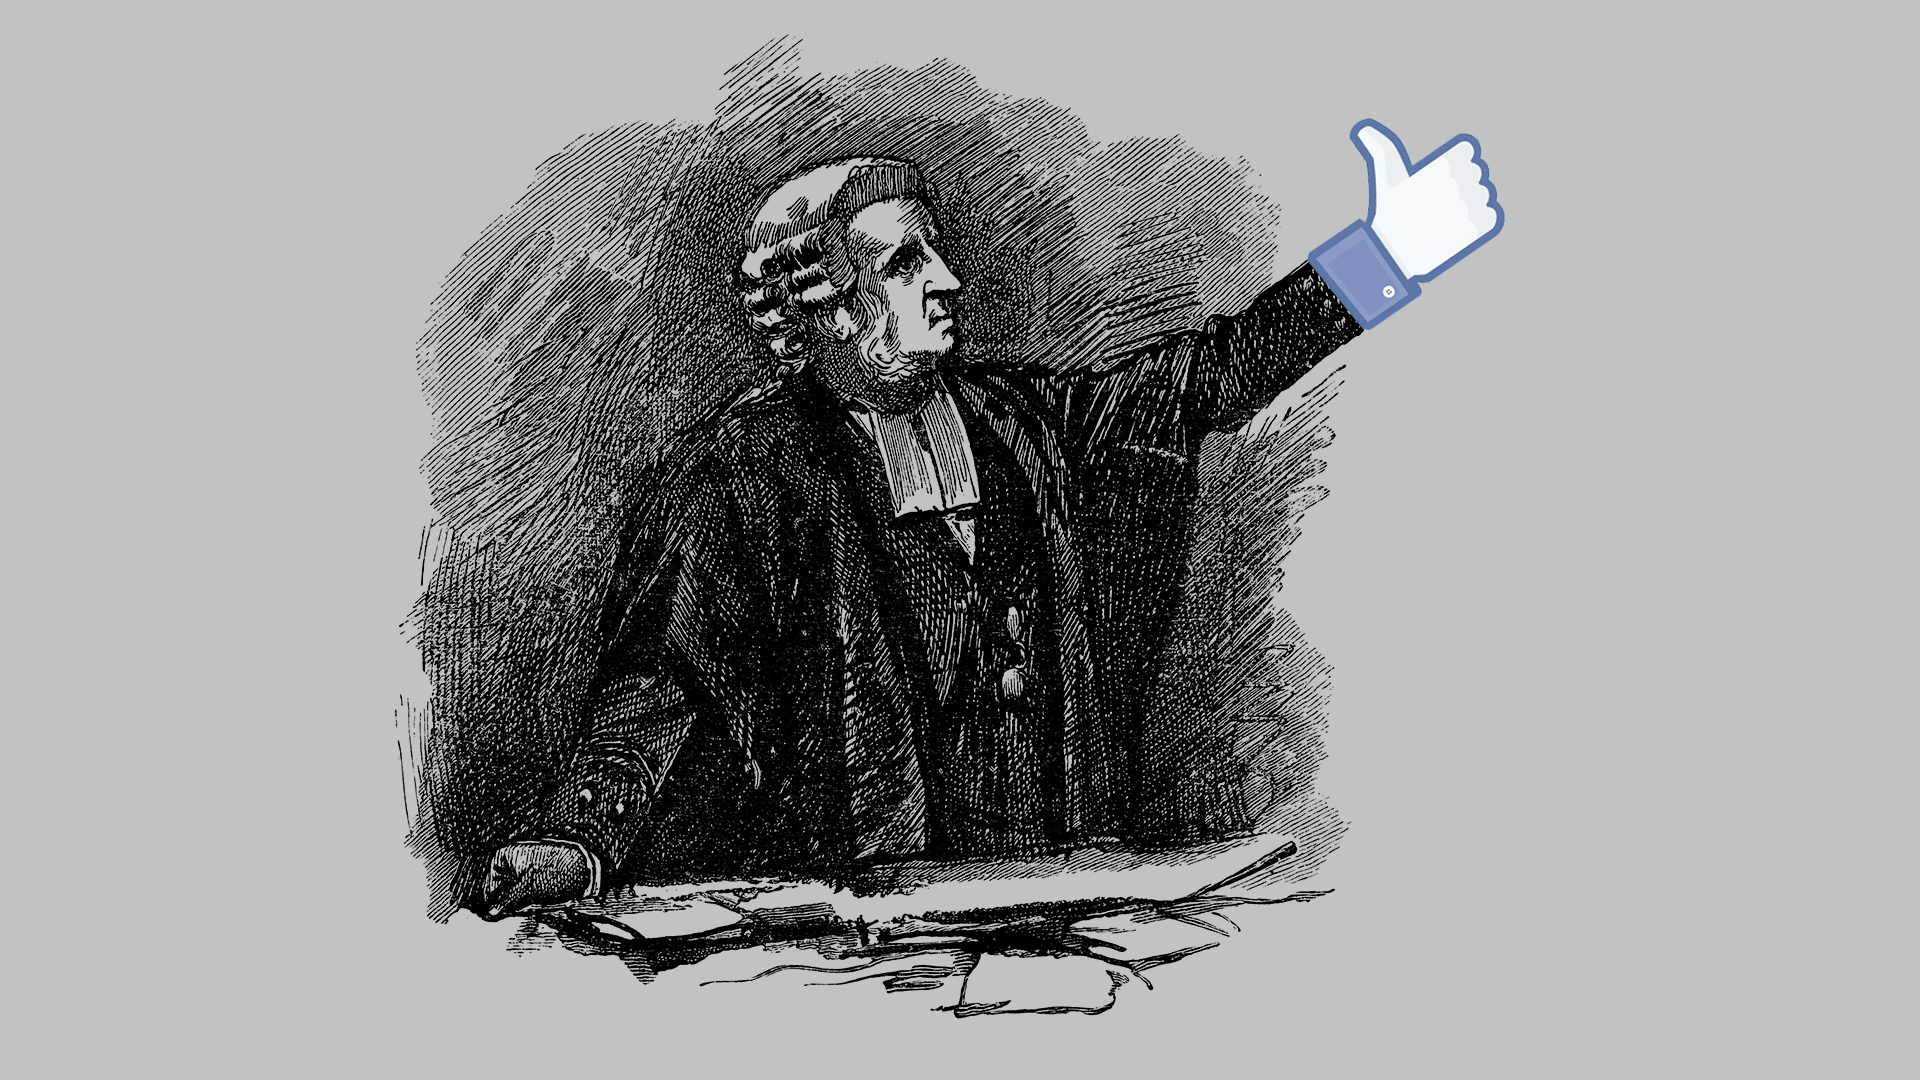 Illustration with woodcut image of an 18th-cengury legislator whose hand is a Facebook "like" icon